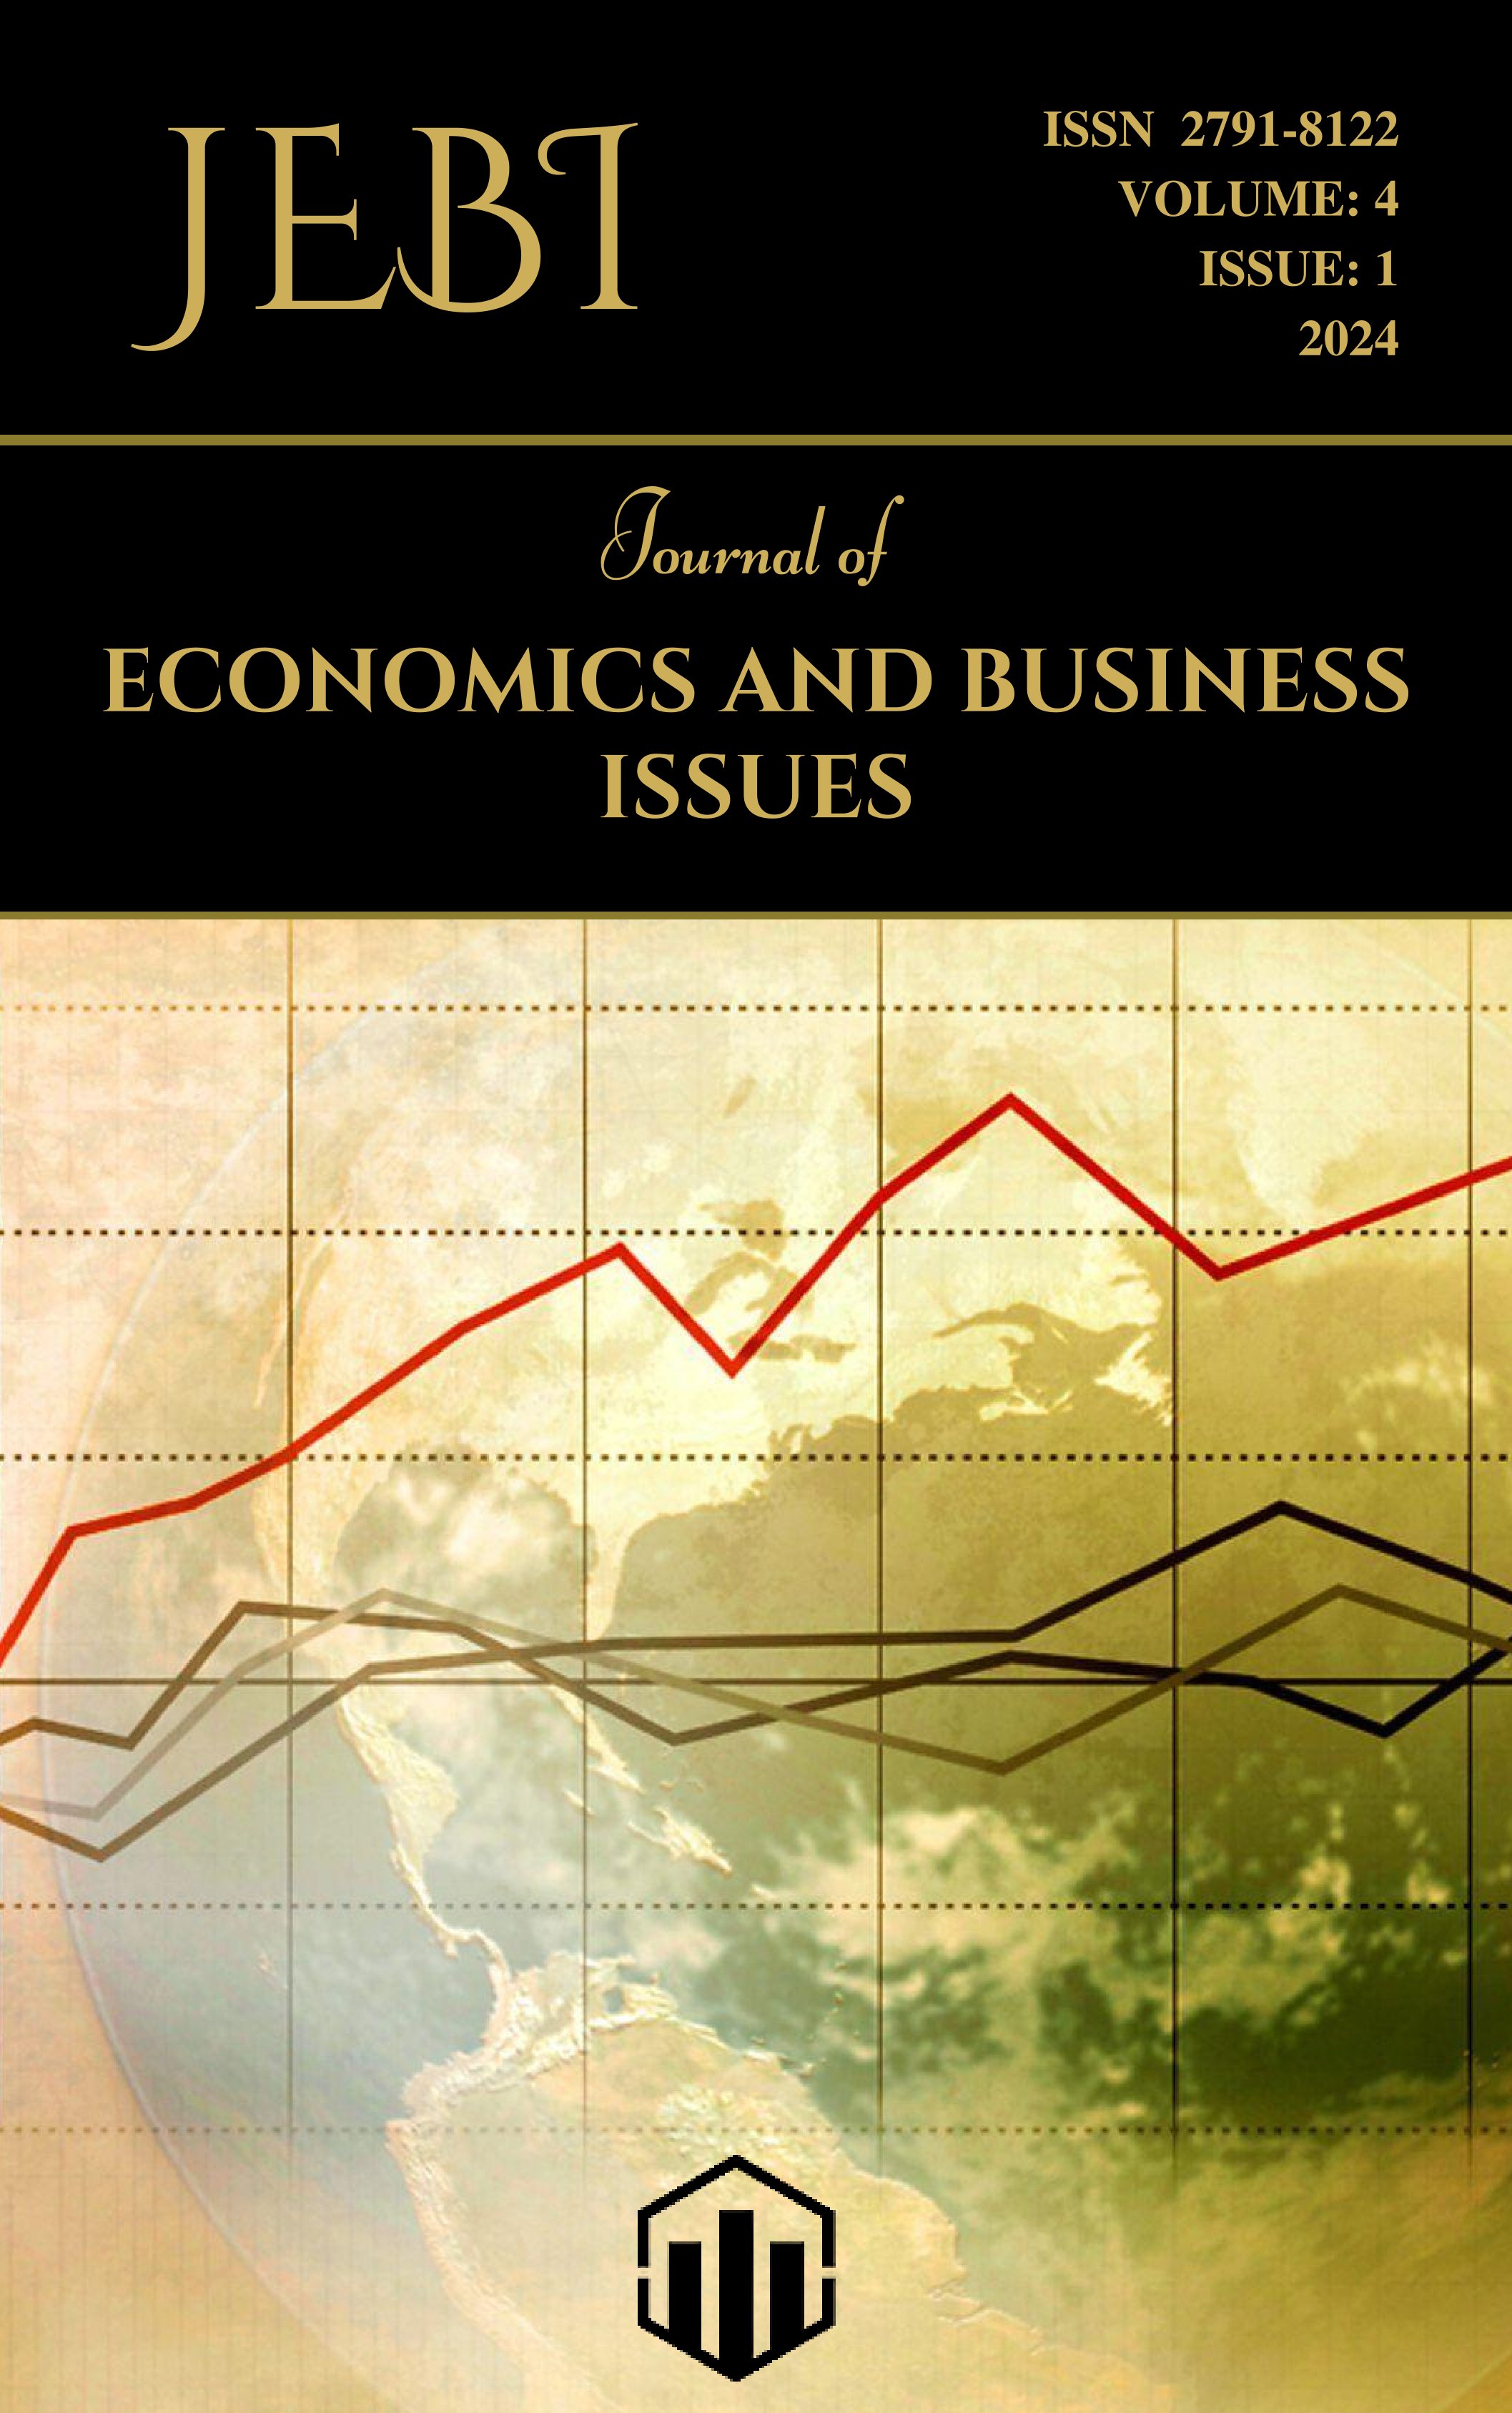 					View Vol. 4 No. 1 (2024): Journal of Economics and Business Issues
				